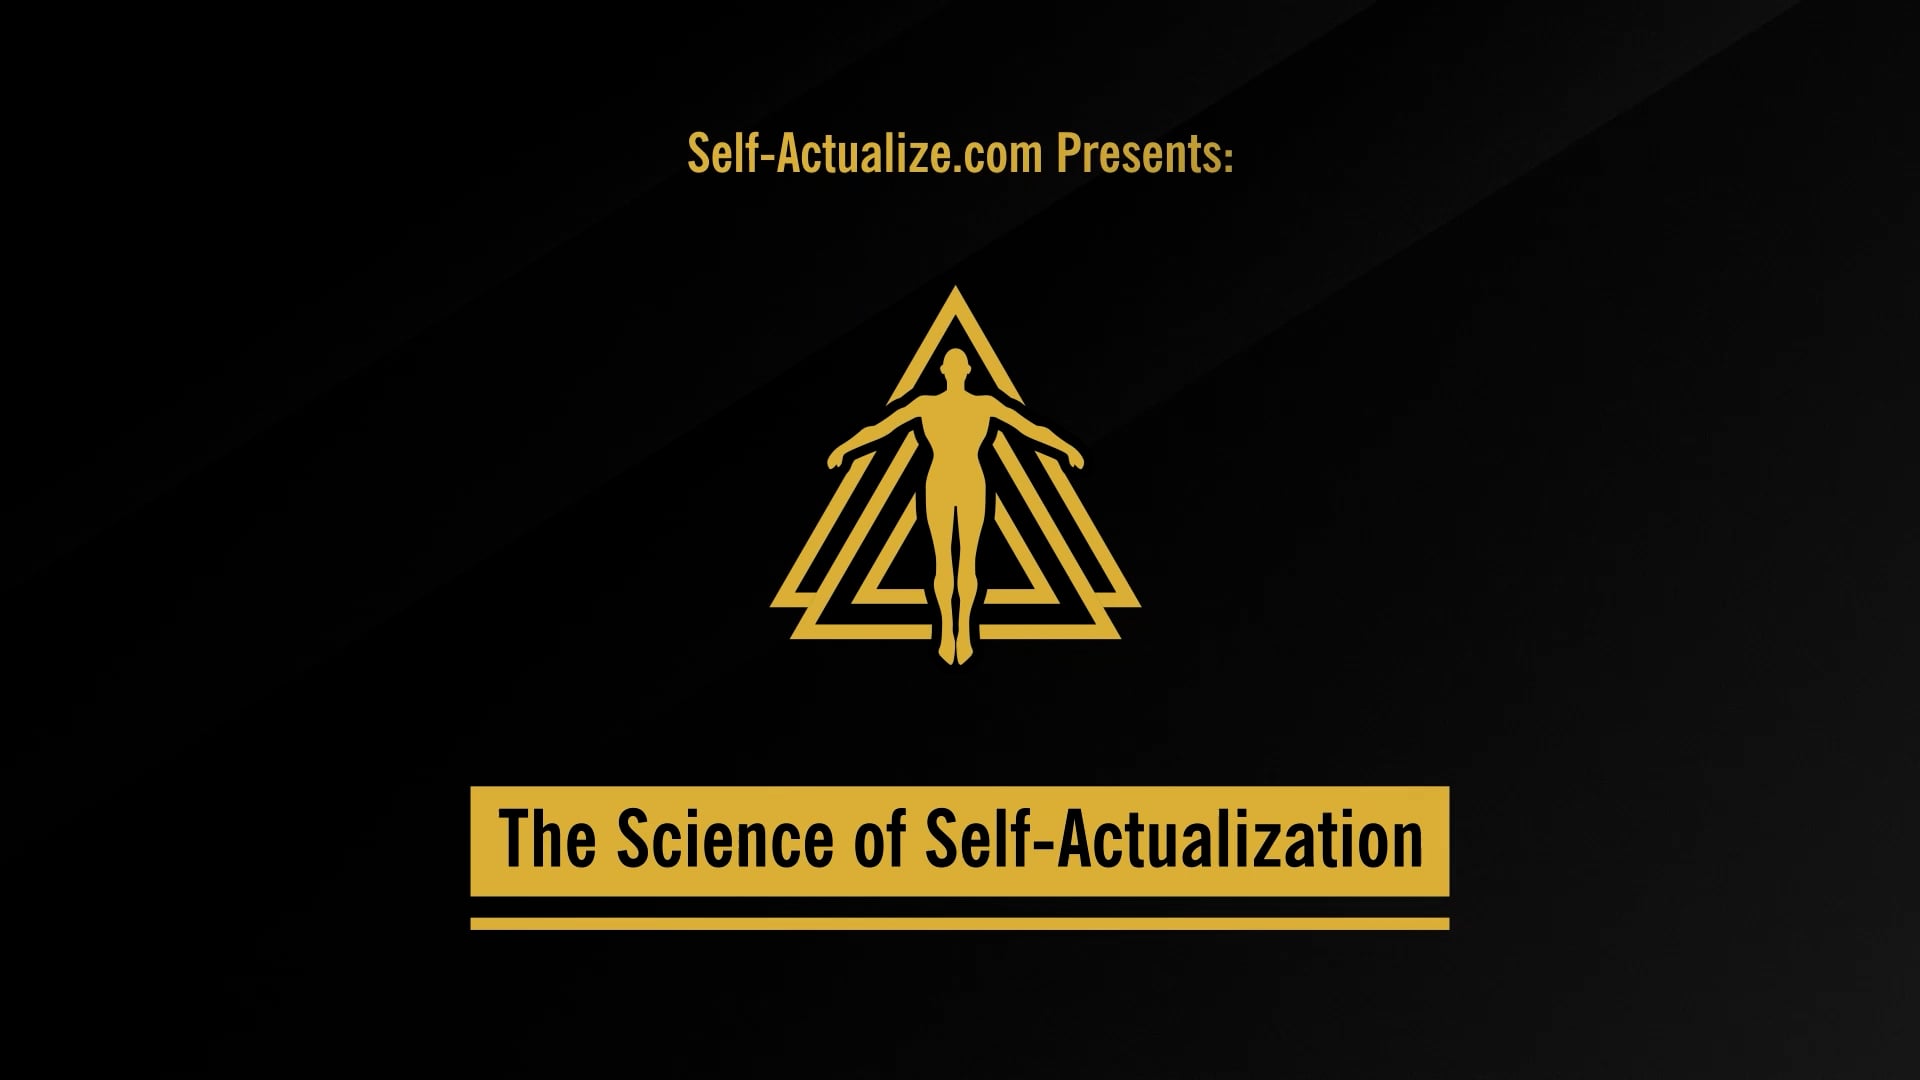 The_Science_Of_Self-Actualization_Module_2_Enhanced on Vimeo